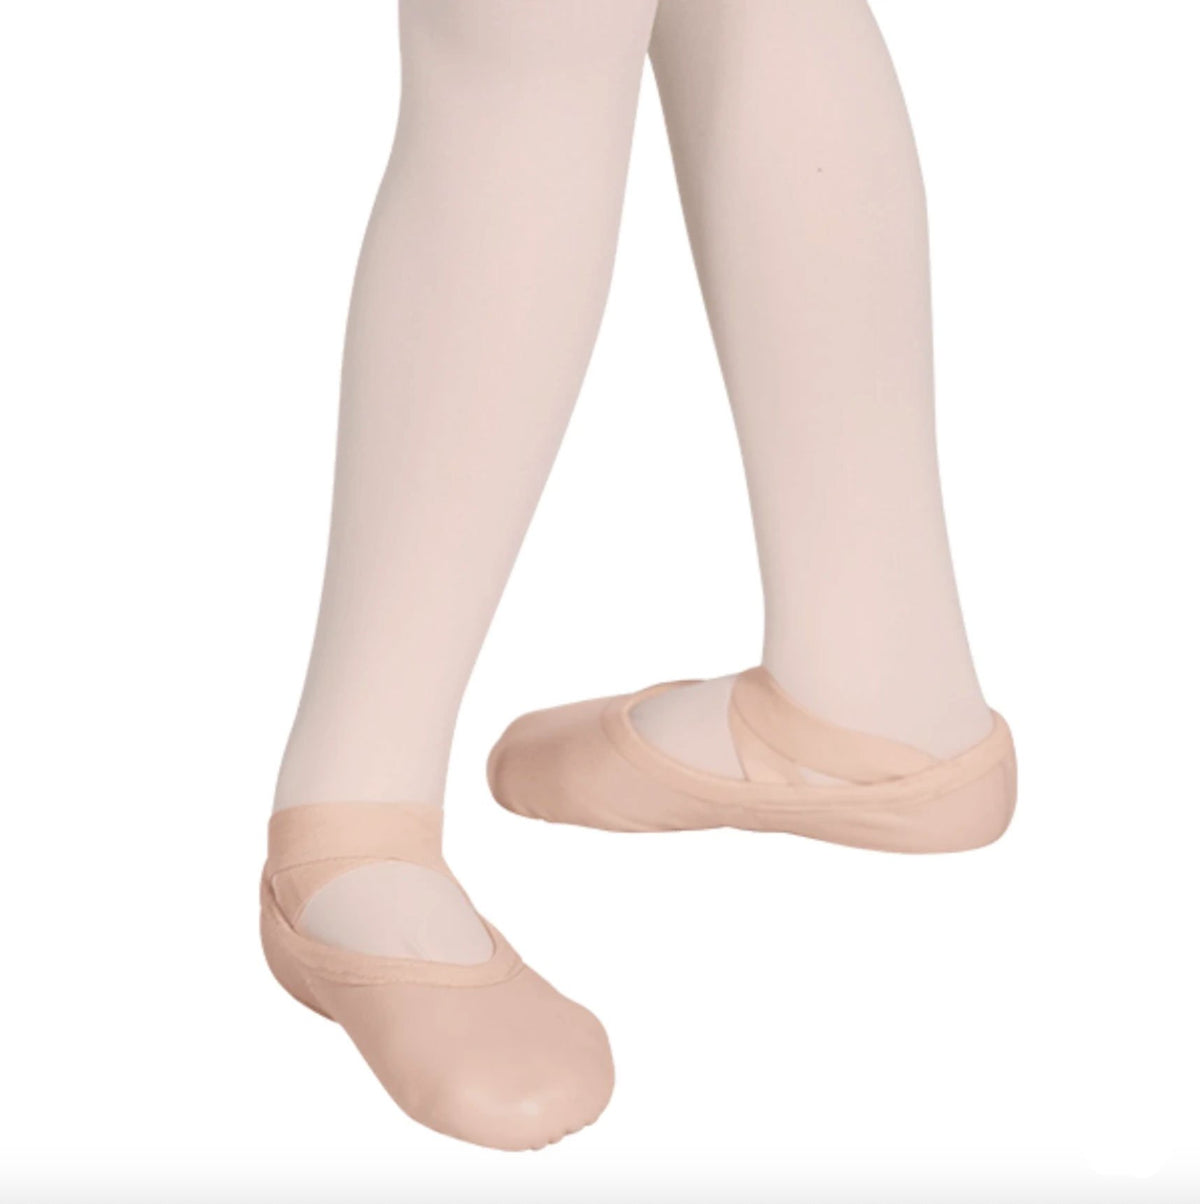 Ballet equipment that helps during ballet classes and preparations - Zarely